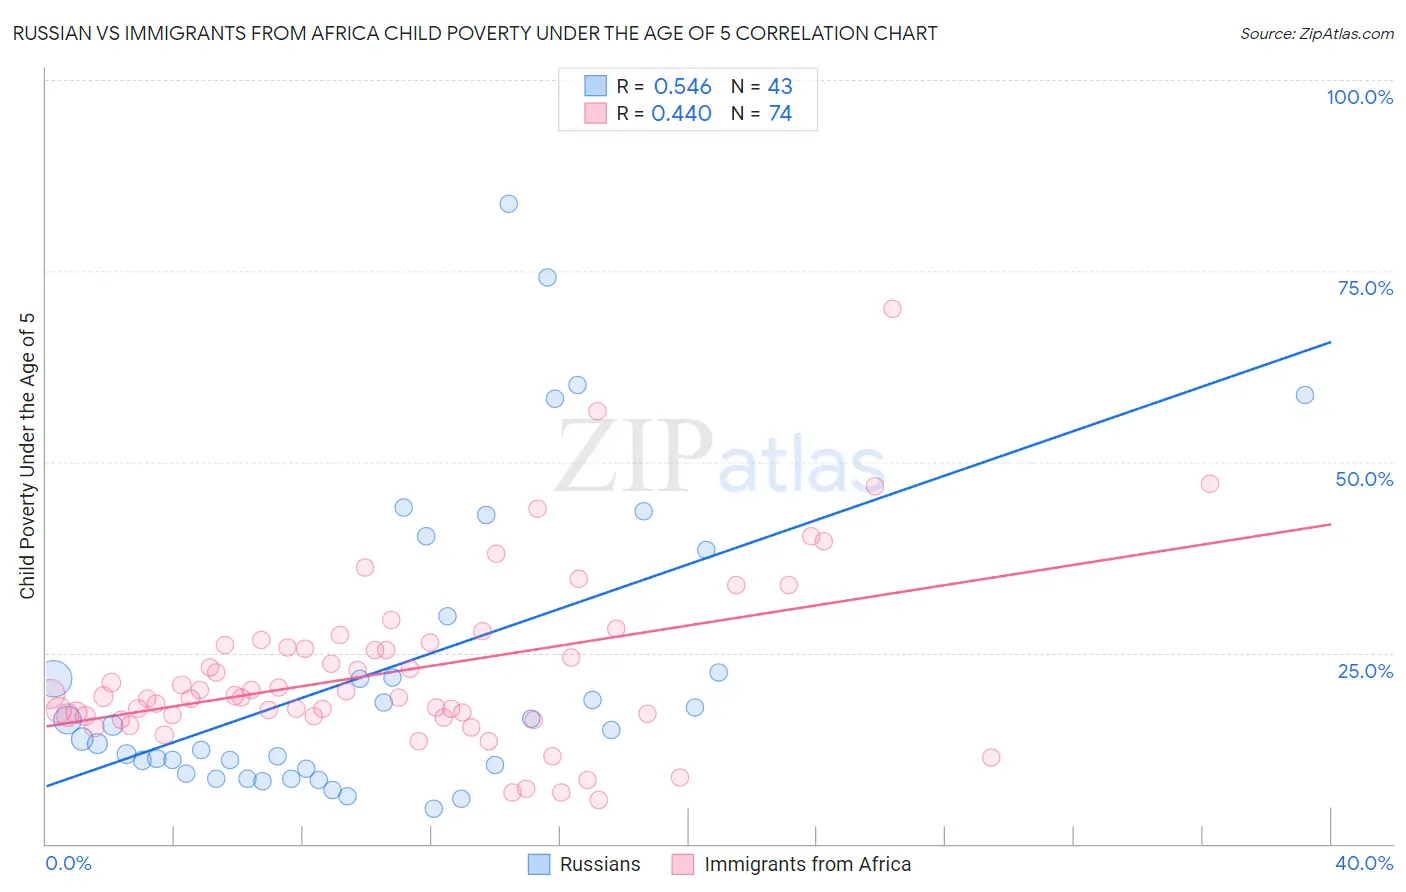 Russian vs Immigrants from Africa Child Poverty Under the Age of 5